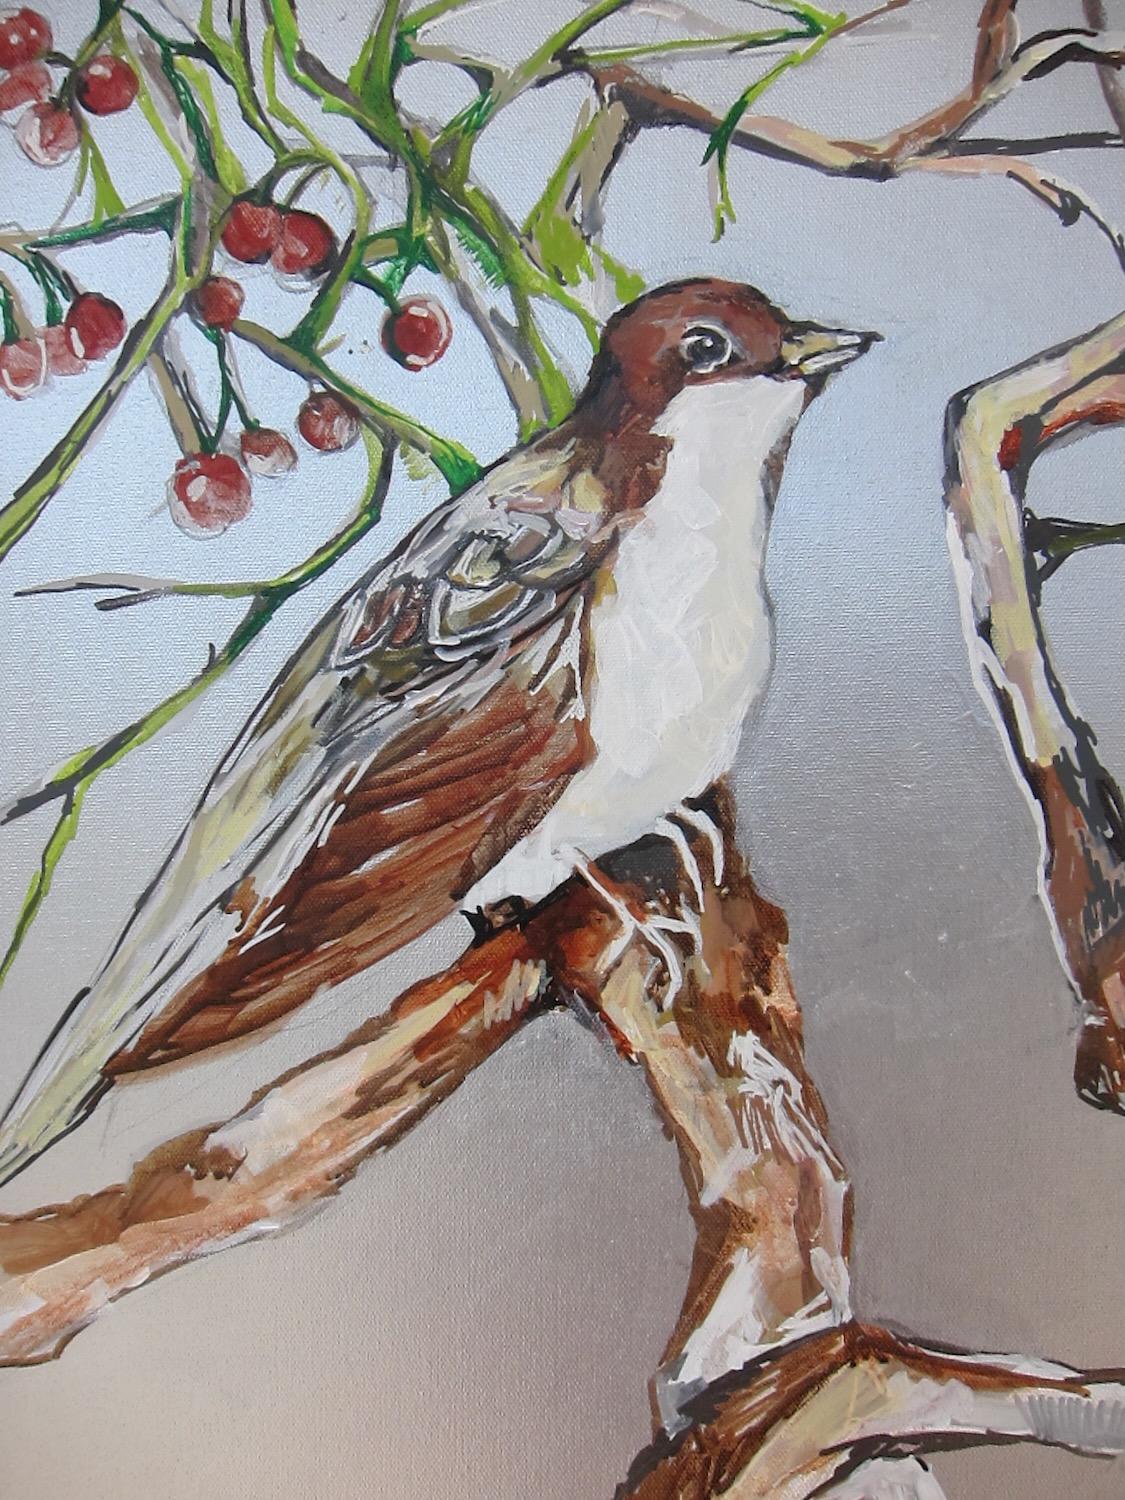 <p>Artist Comments<br>Artist Colette Wirz Nauke paints a bird perched on a tree. Plump red berries adorn the meandering branches, creating a sense of movement and vitality to the piece. The subtle, thin layers of neutral colors contrast beautifully